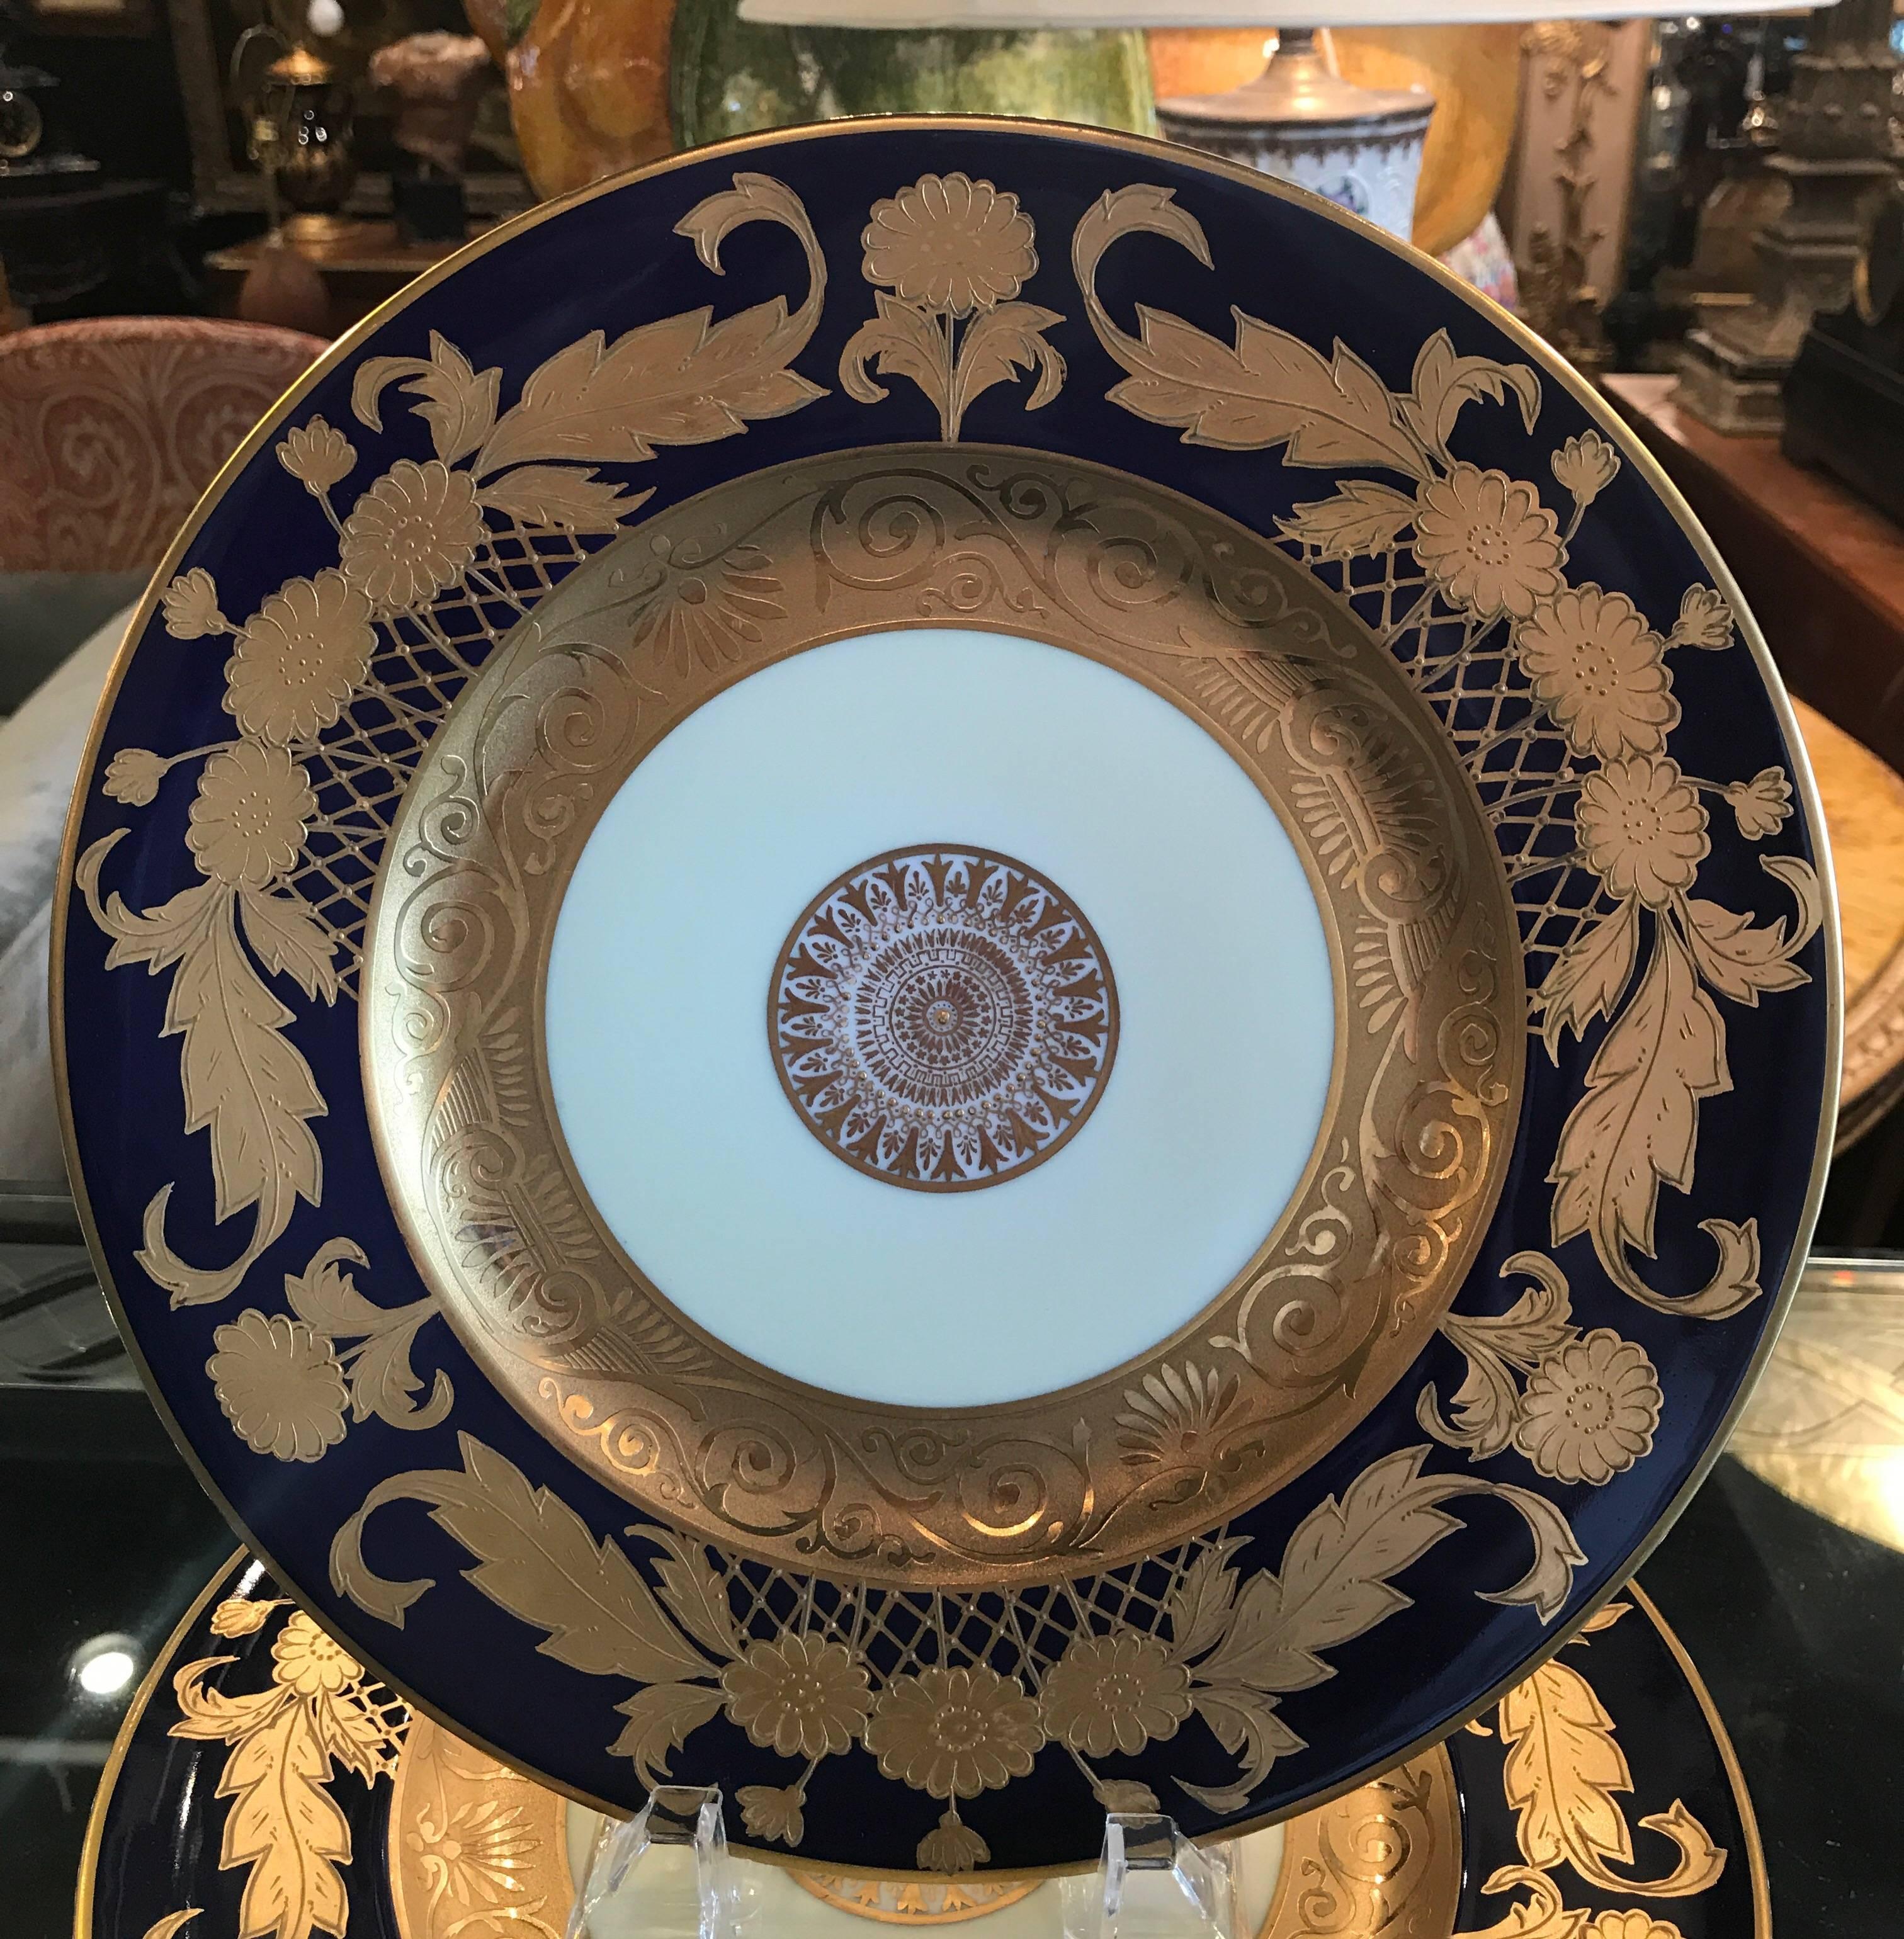 A set of 12 cobalt and gold encrusted service plates by Hutschenreuther. Opulent borders of raise gold with a rich cobalt blue background with centre medallion.